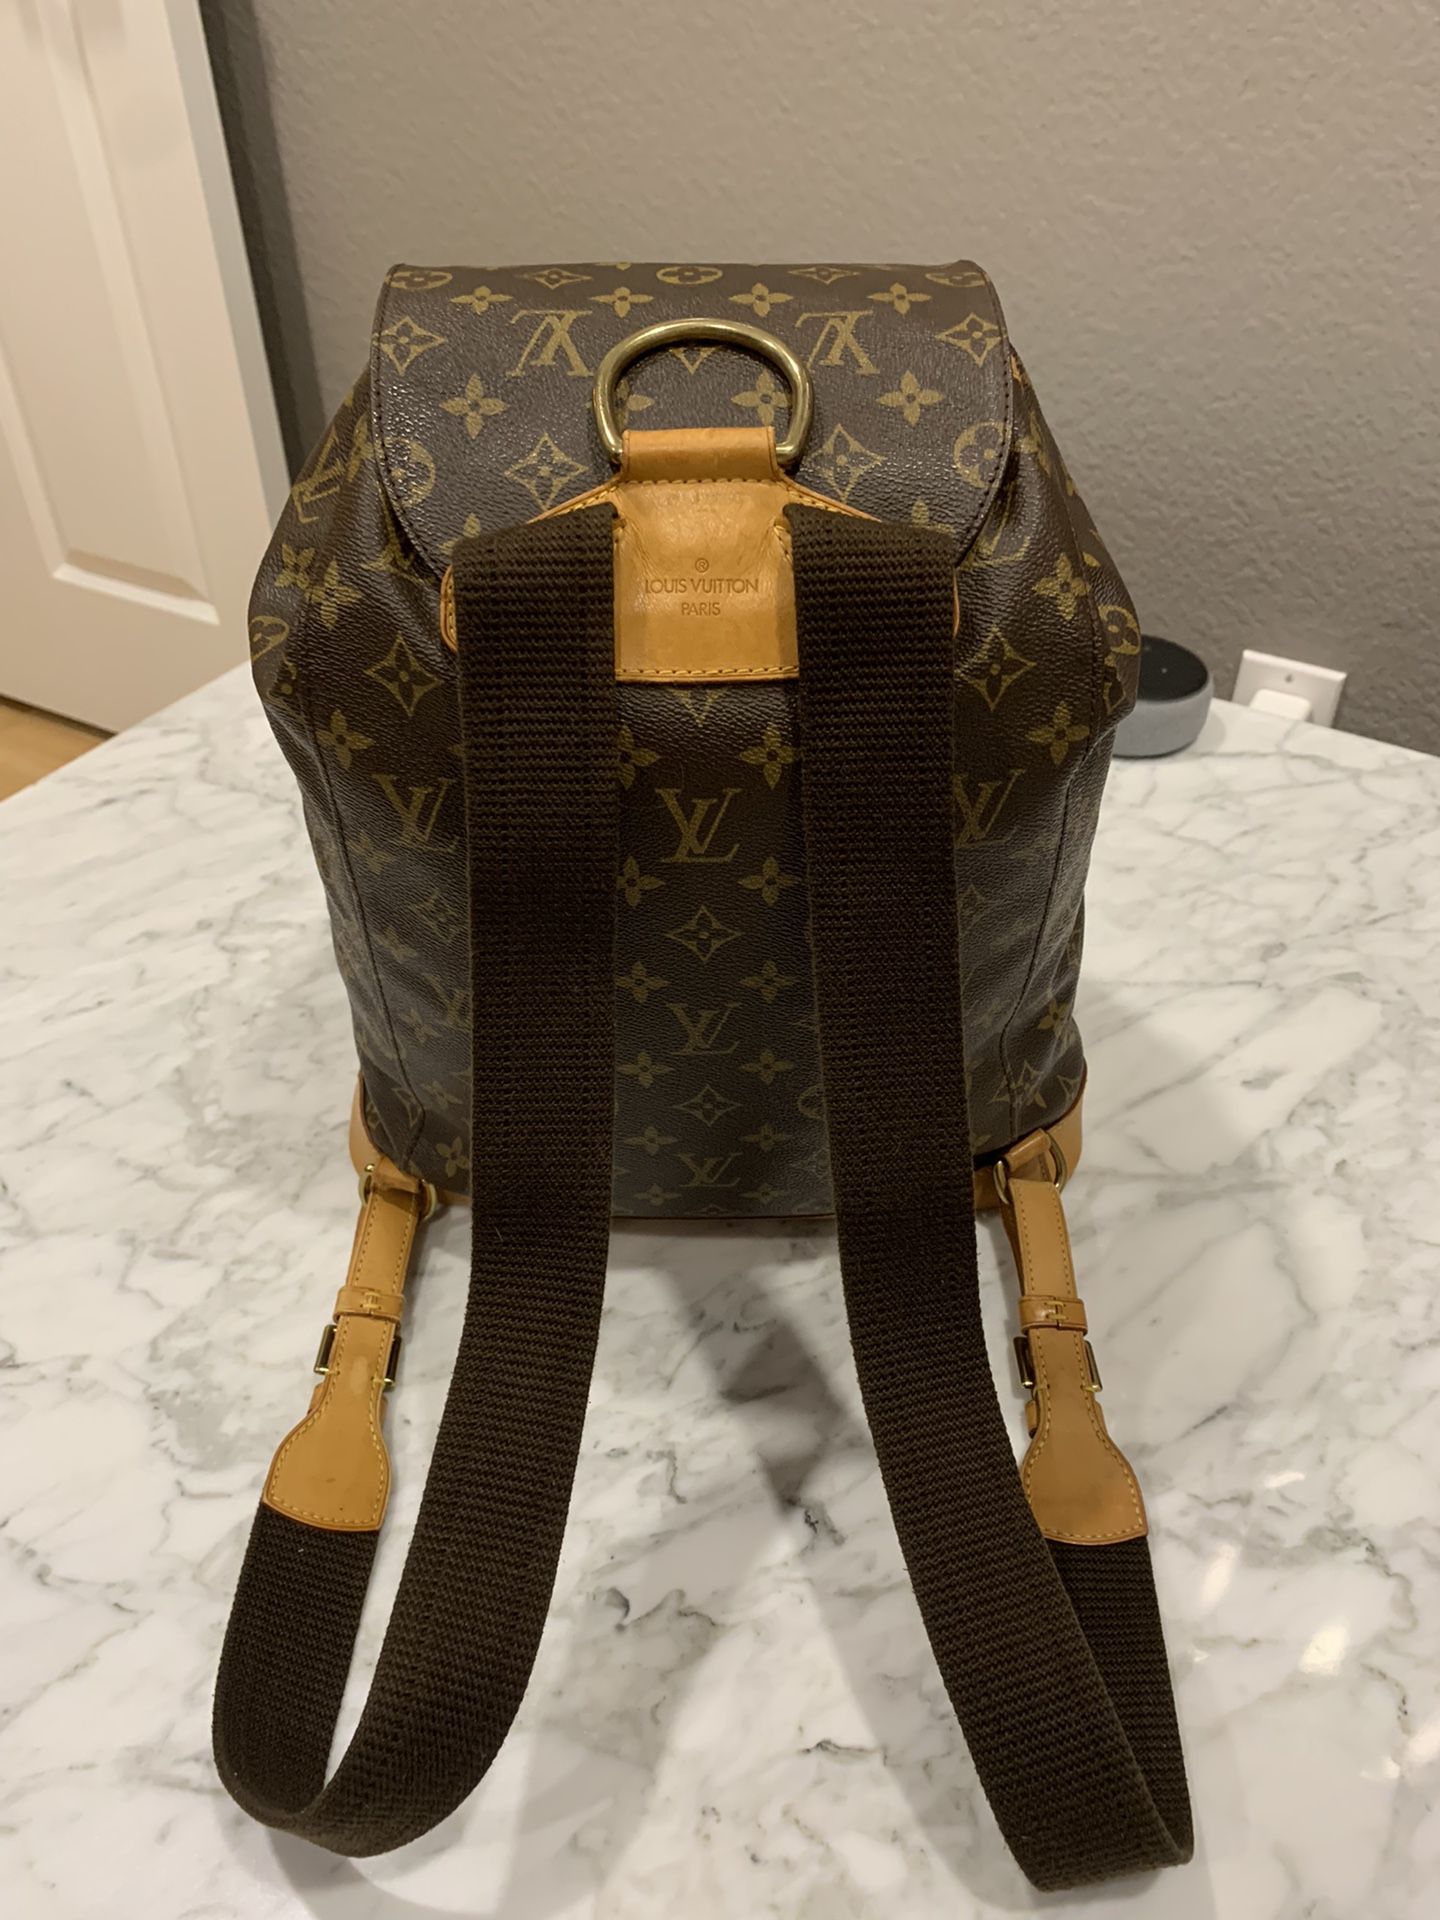 Louis Vuitton Montsouris Backpack - M45205 for Sale in Downey, CA - OfferUp